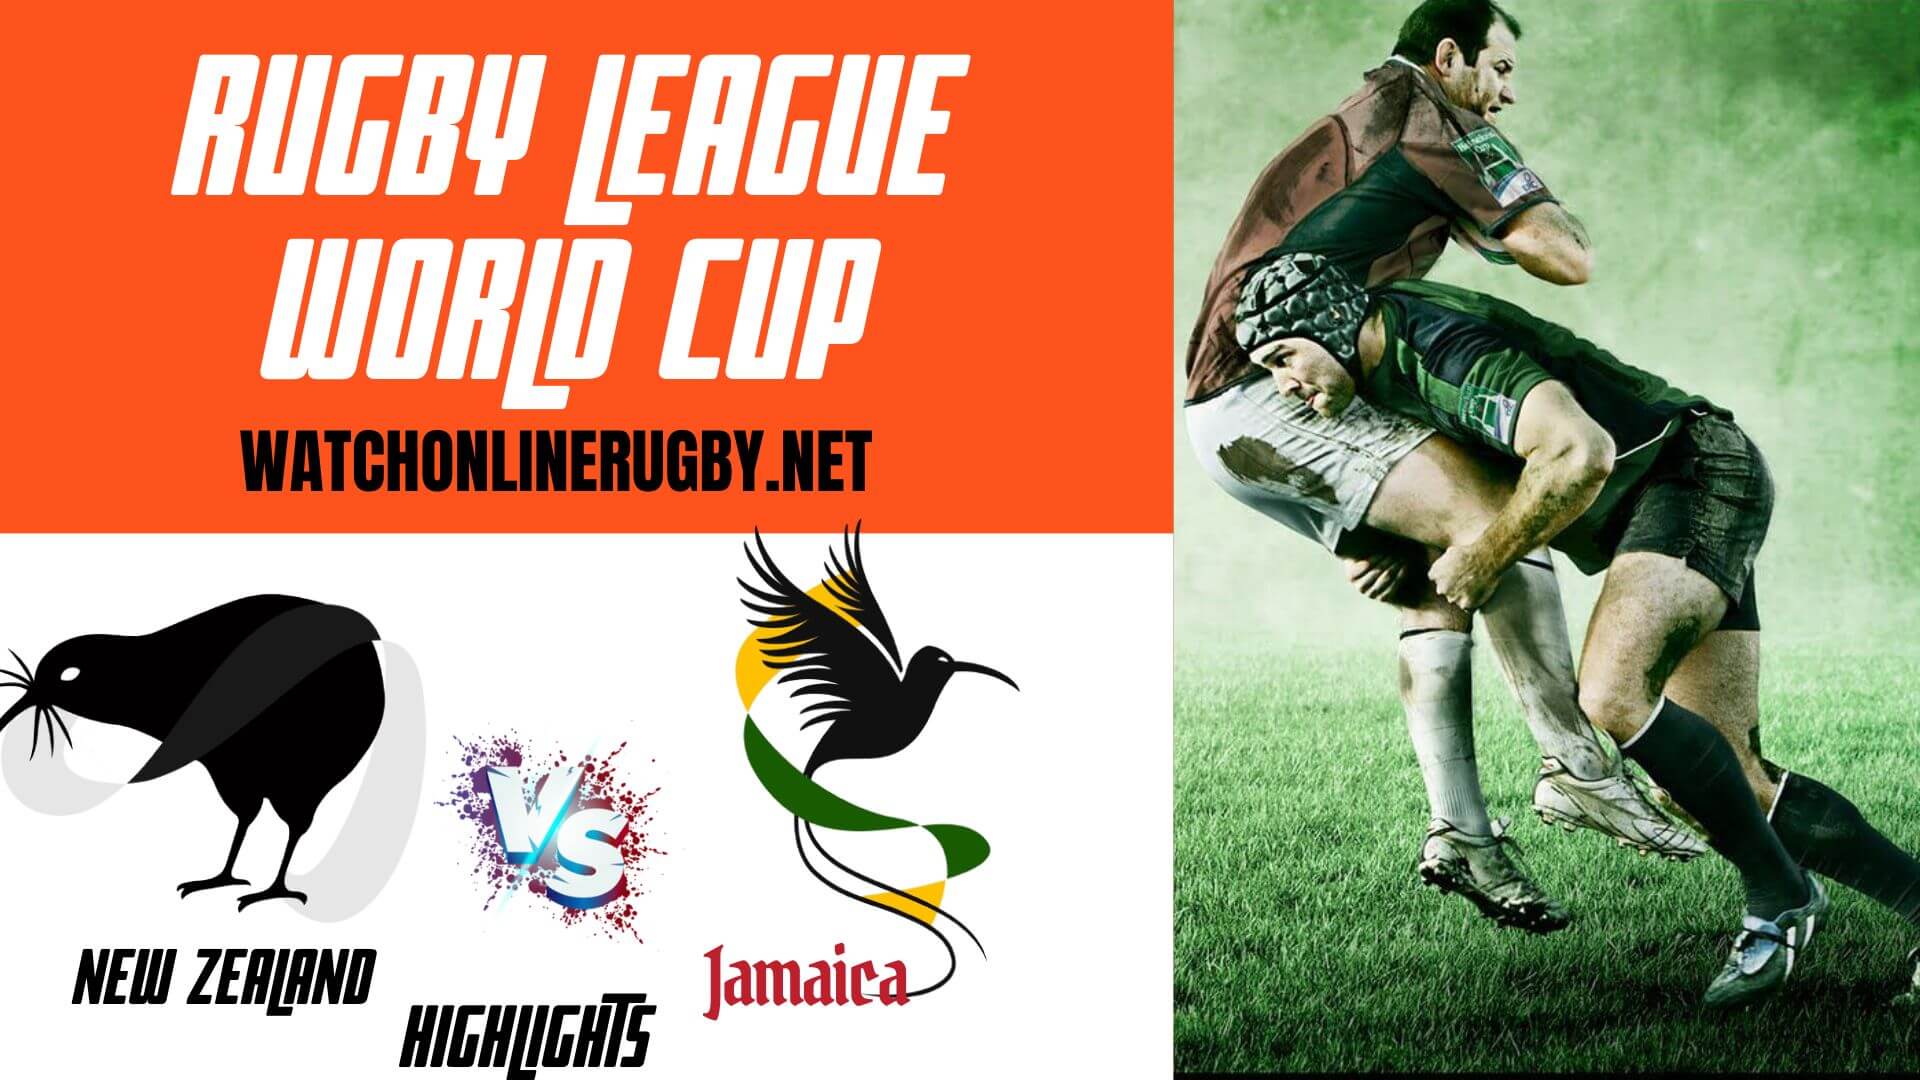 New Zealand Vs Jamaica Rugby League World Cup 2022 RD 2